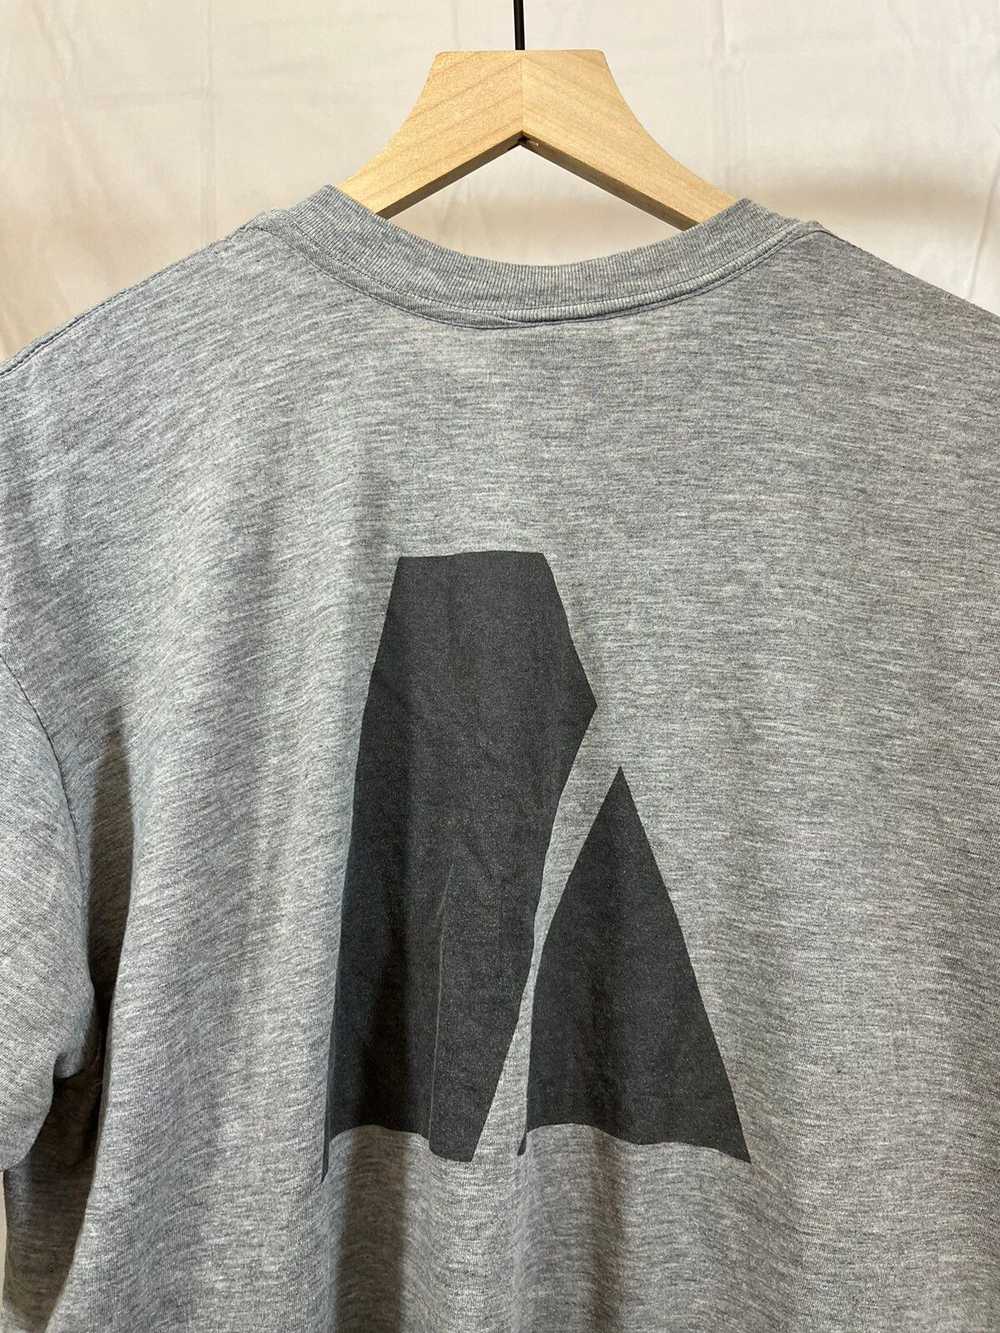 Military × Vintage Vintage ARMY Grey Thin Faded M… - image 10